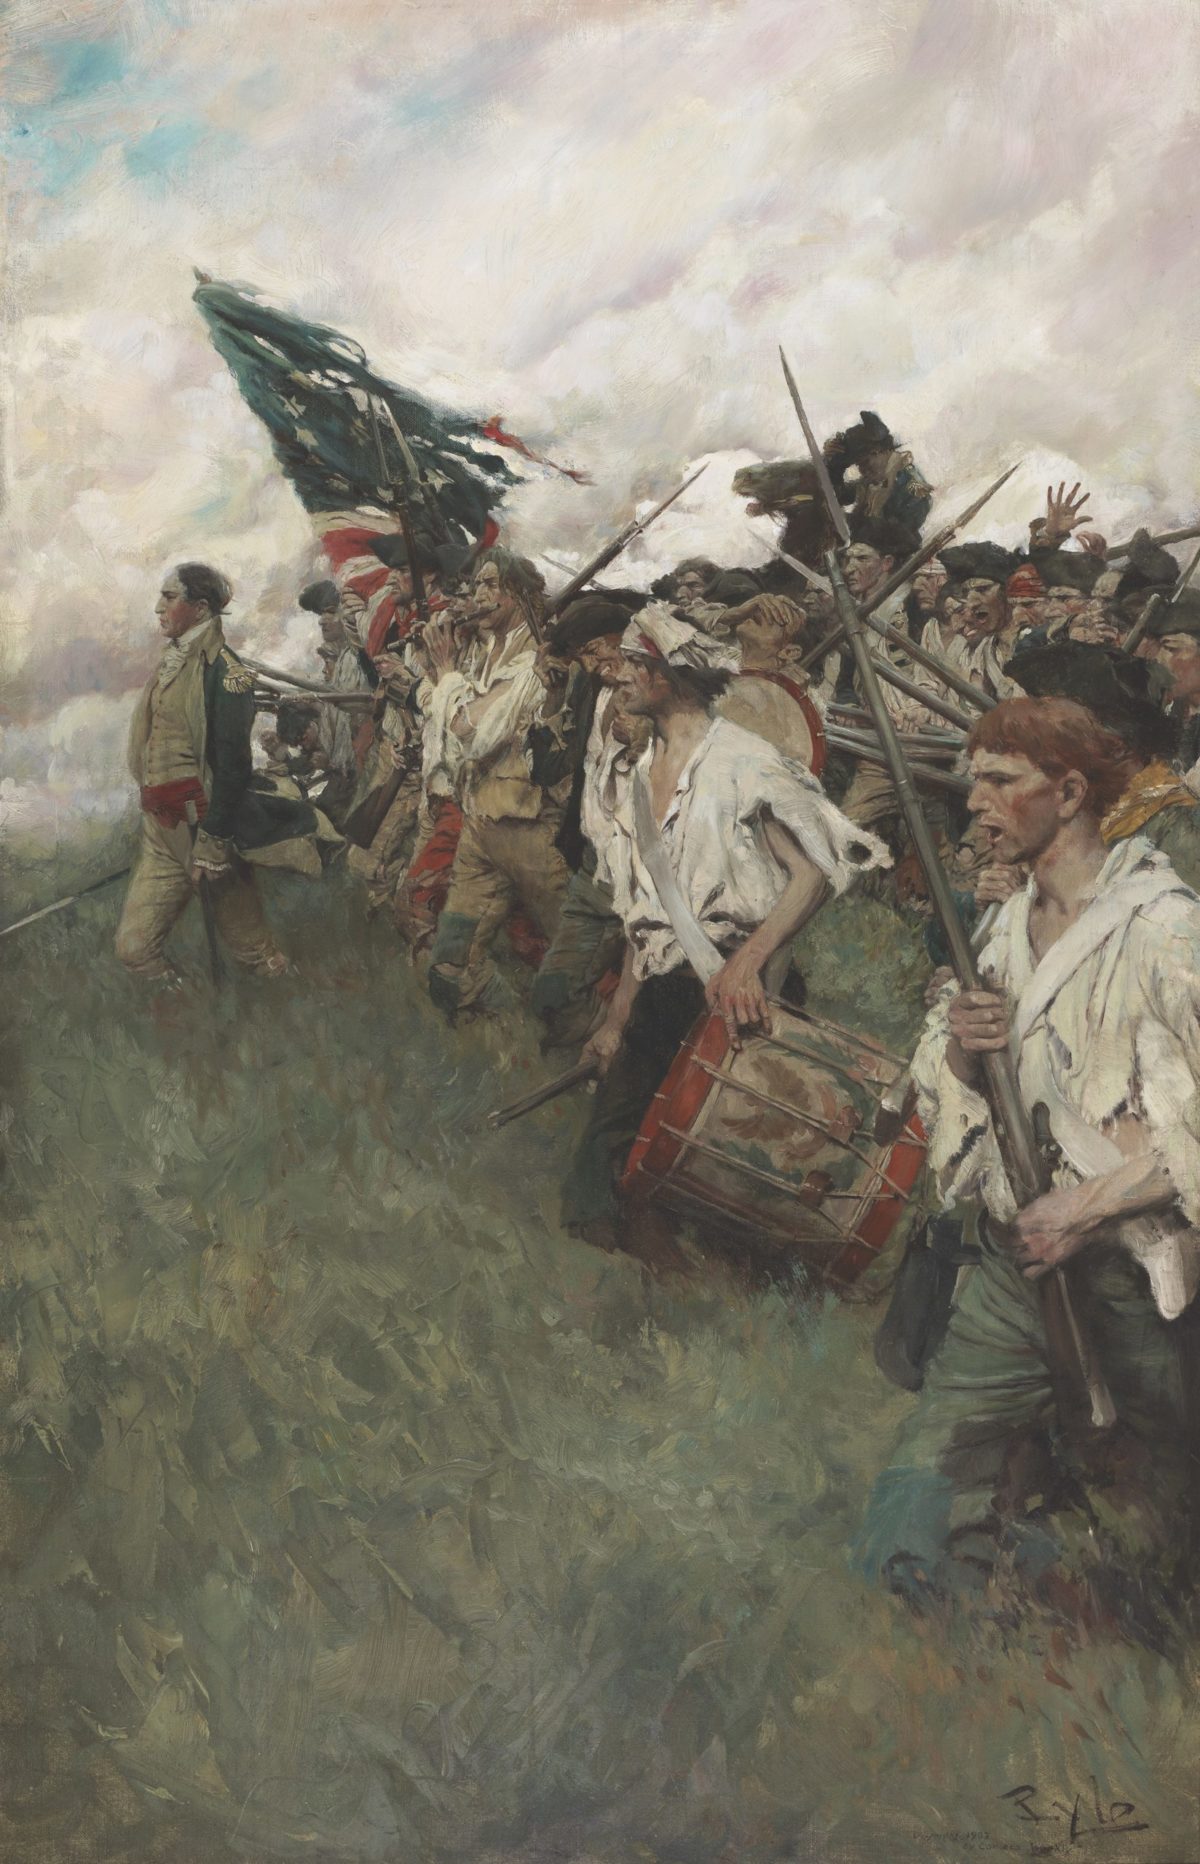 The Nation Makers, Battle of Brandywine